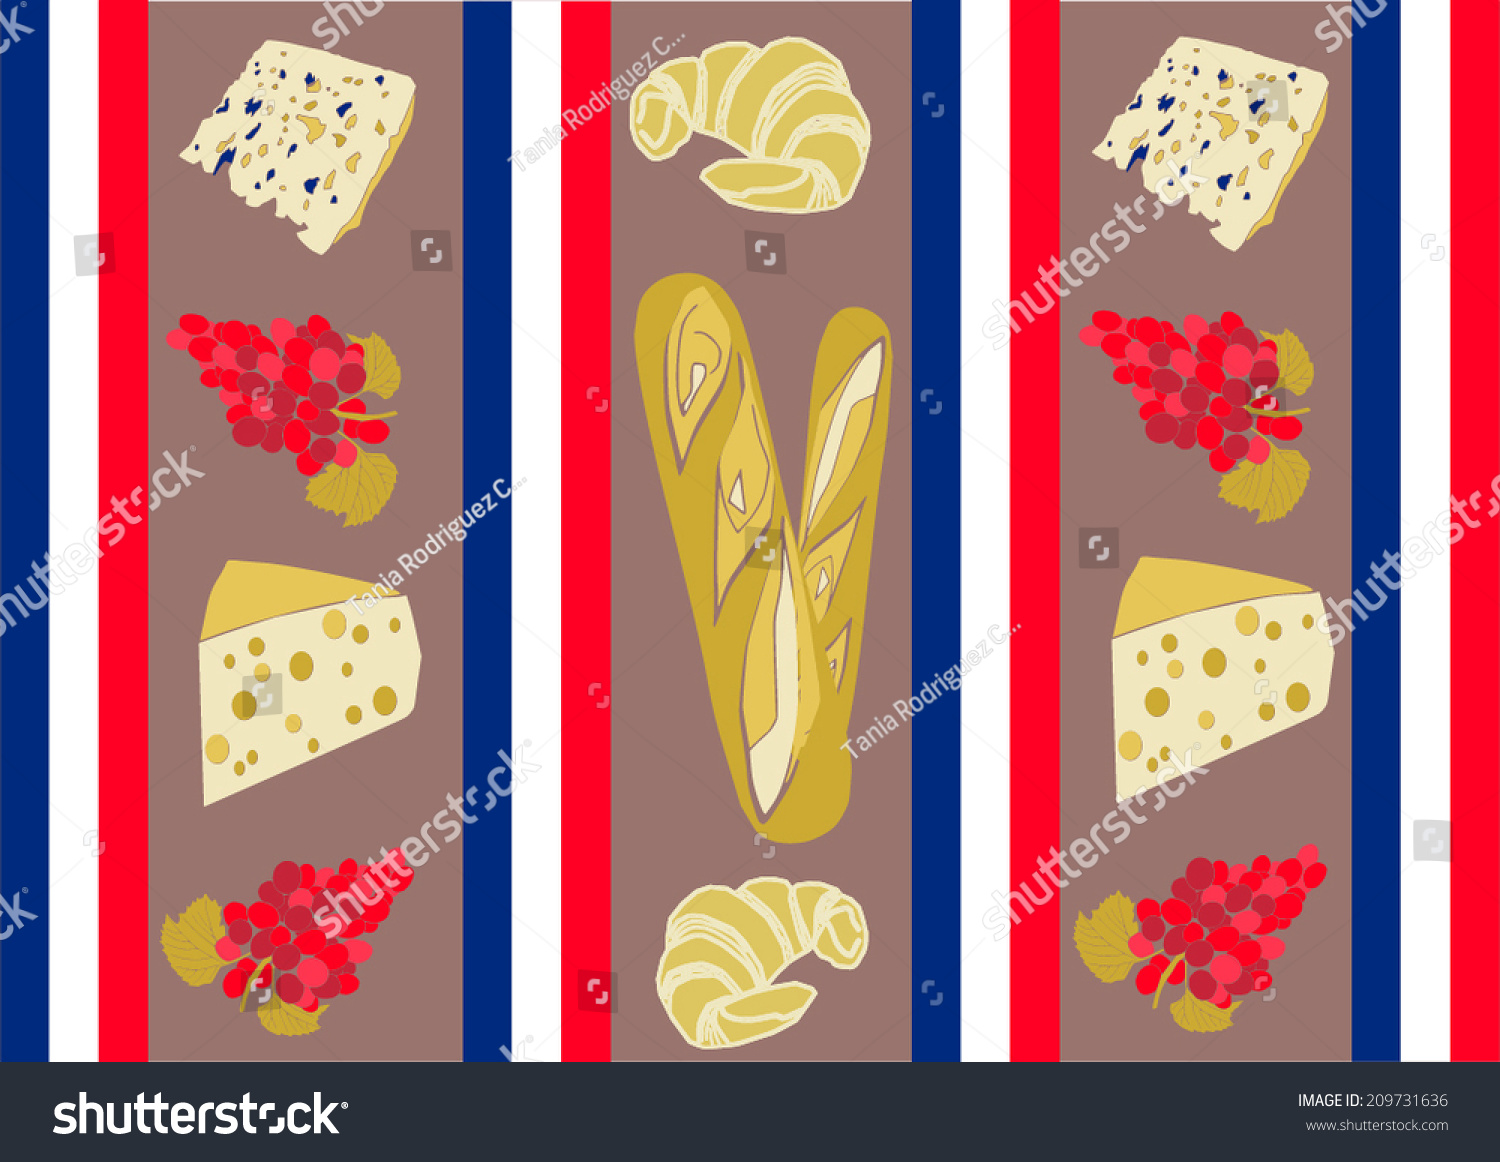 Wallpaper Food Typical France Colors Blue Stock Vector Royalty